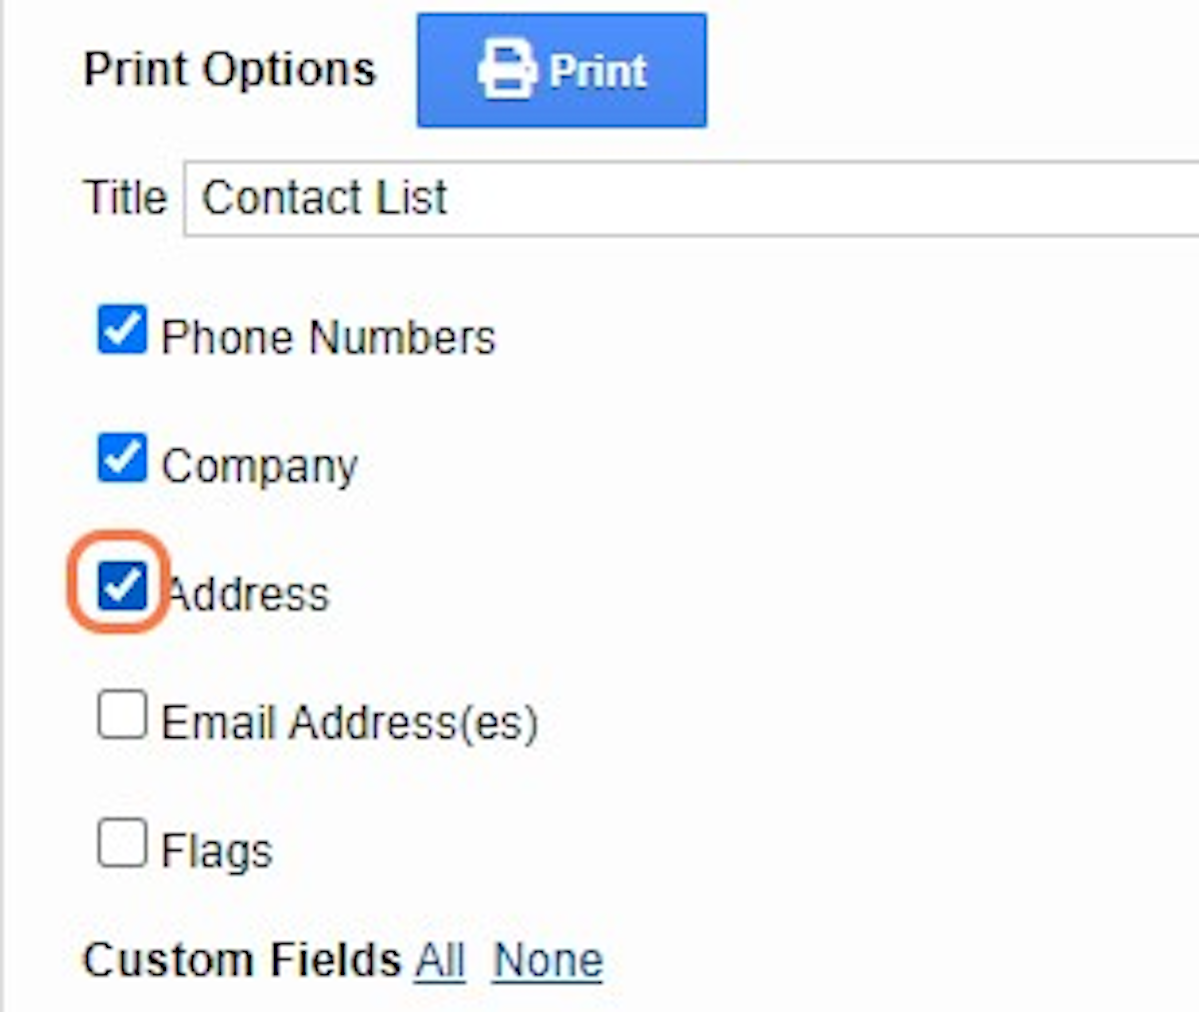 Select the items you would like to include on the printout